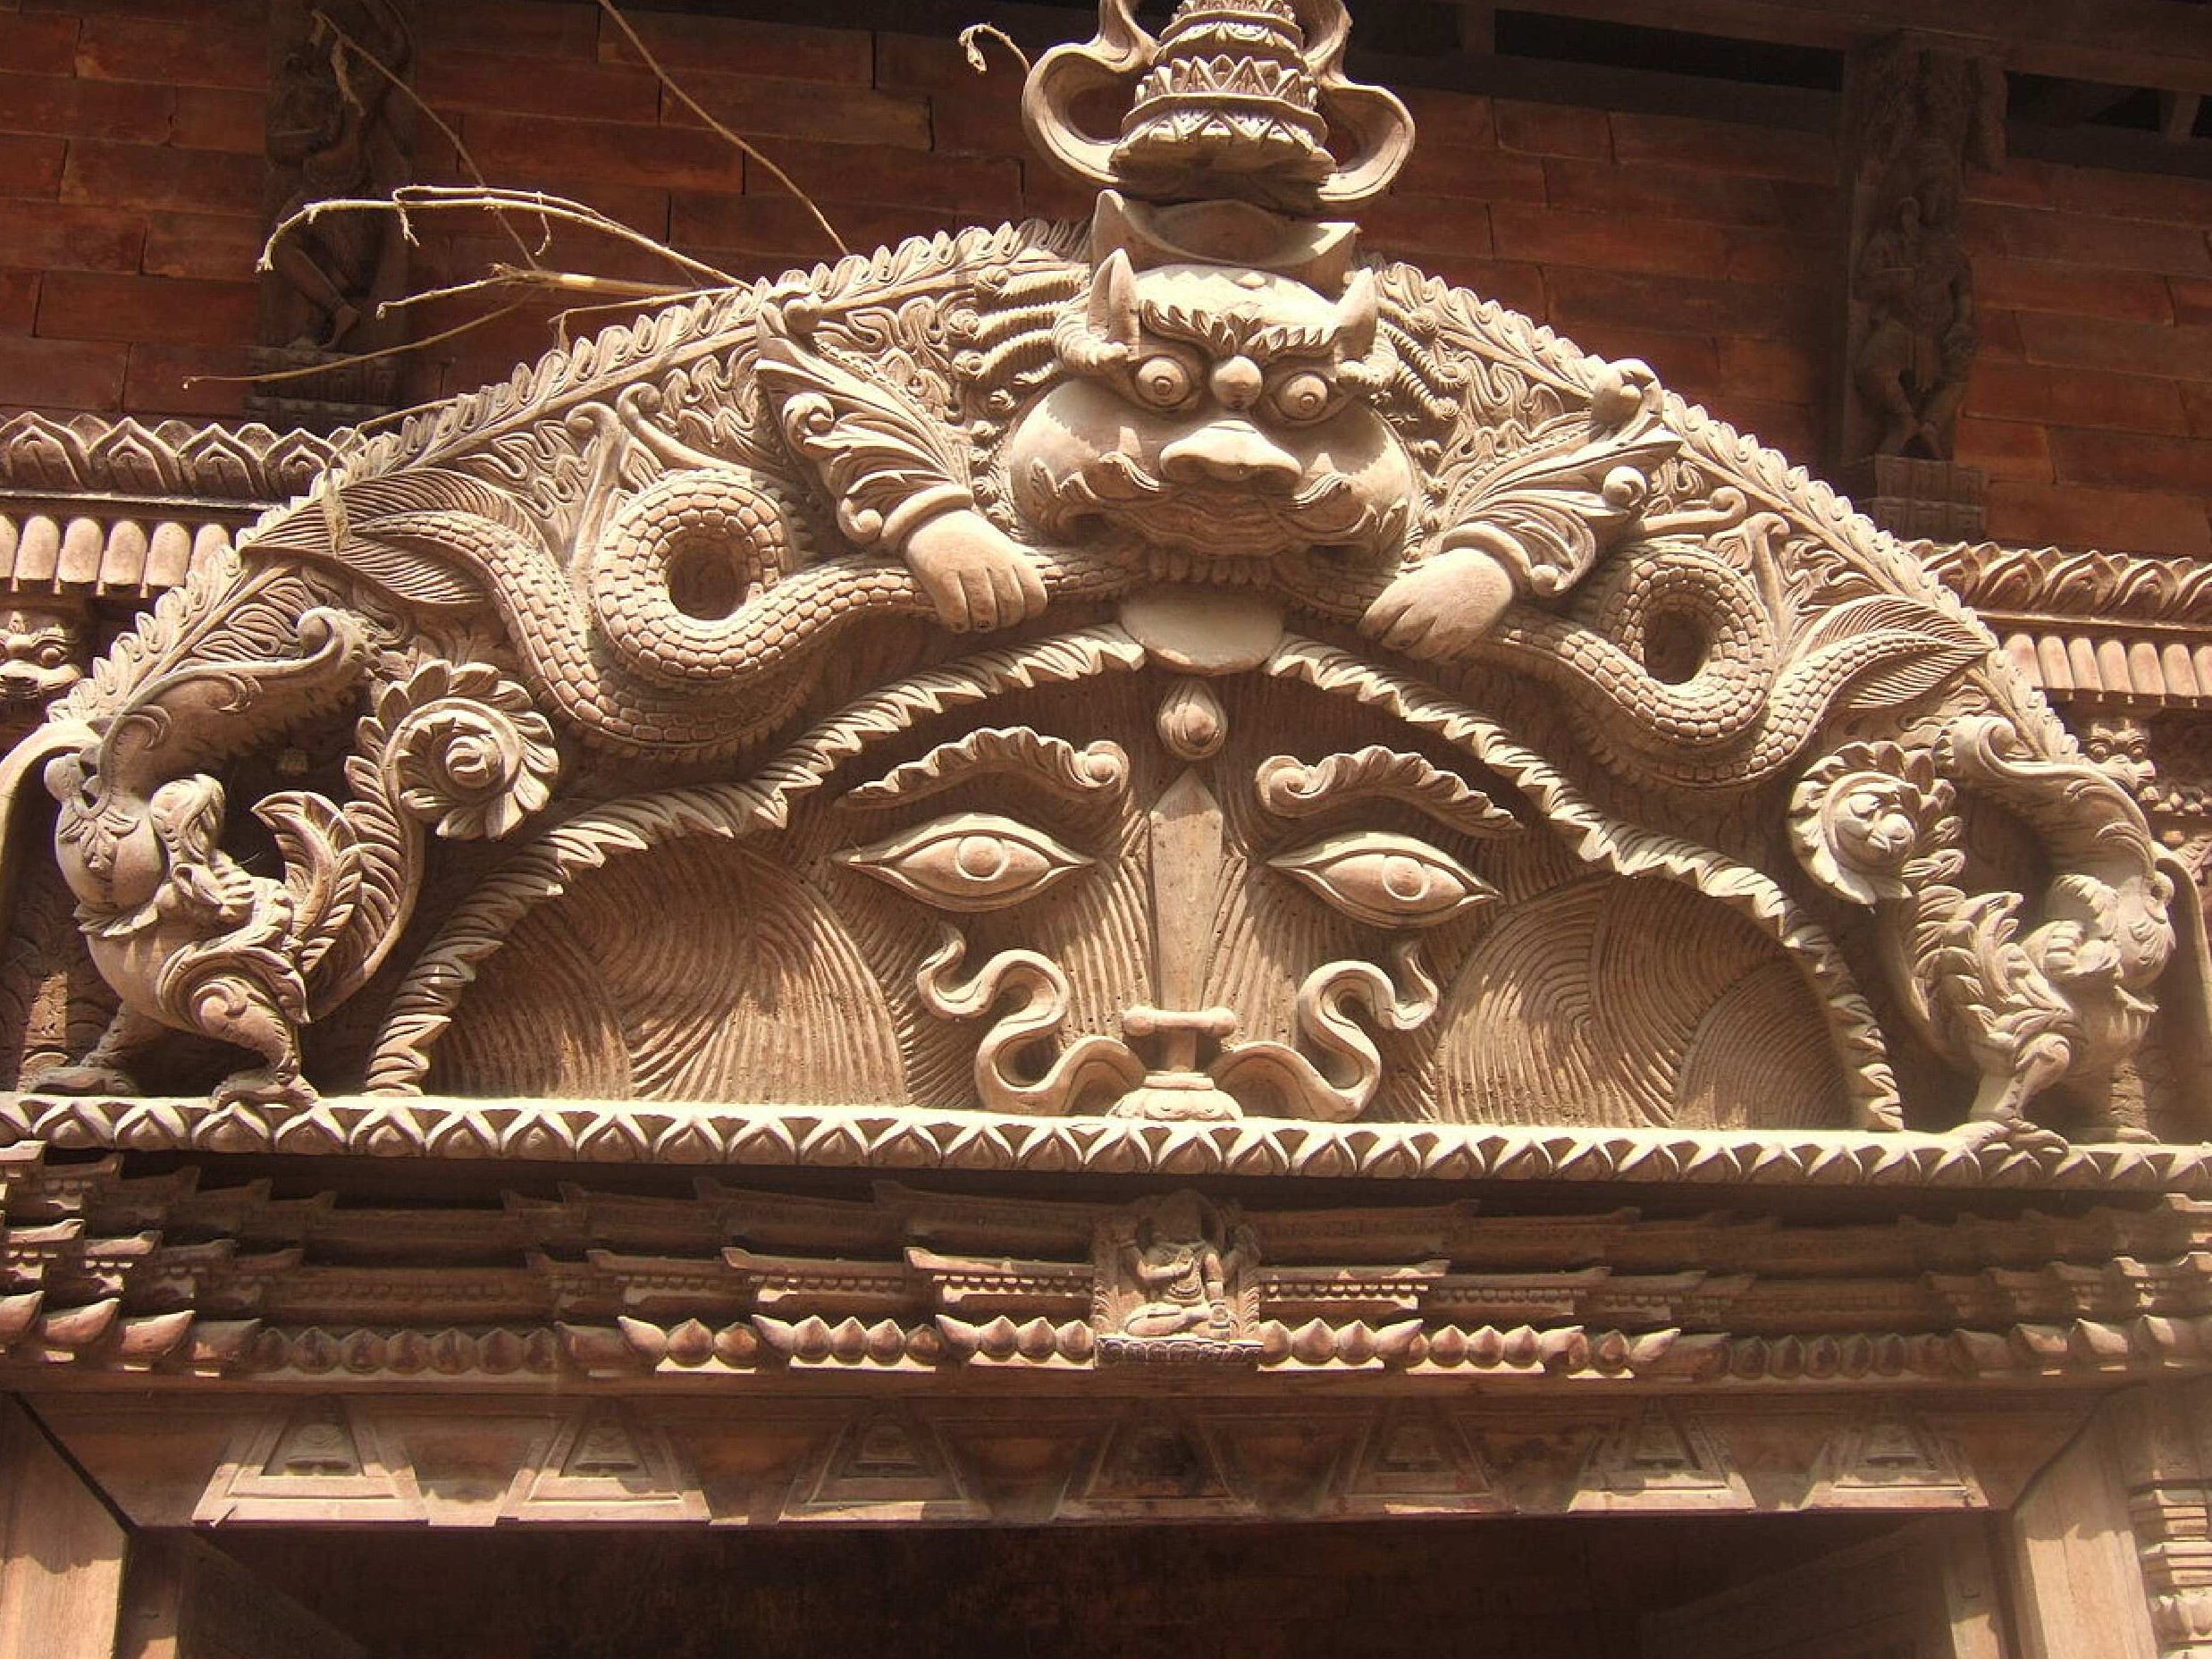 A form of Kirtimukha depicted in entrance of hindu temple